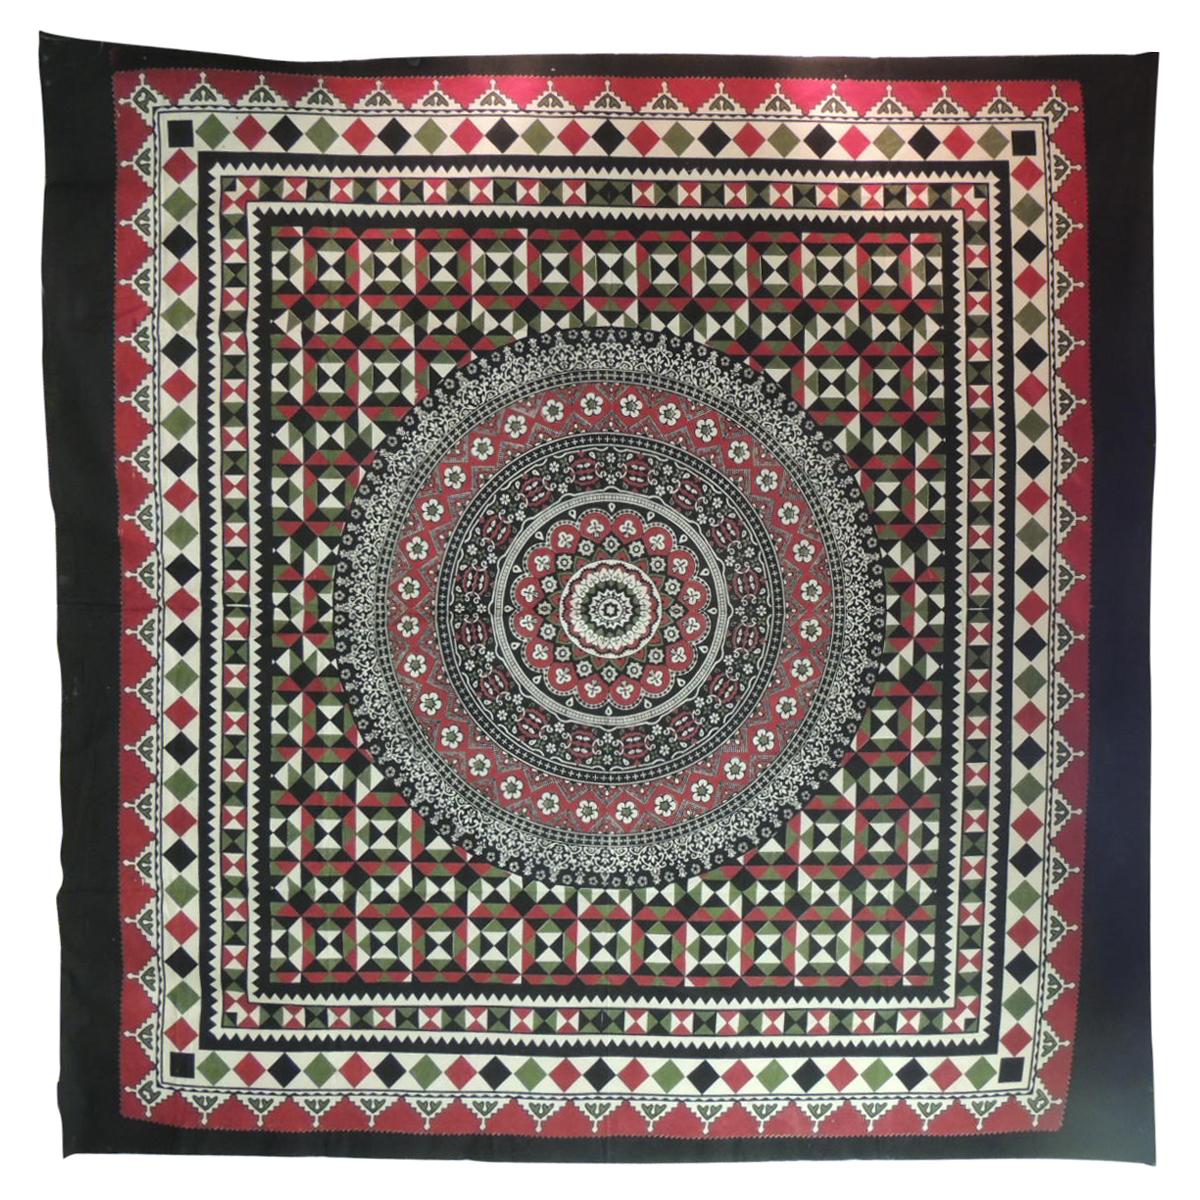 Large Indian Red and Black Hand-Blocked Printed on Cotton Cloth/Bed Cover